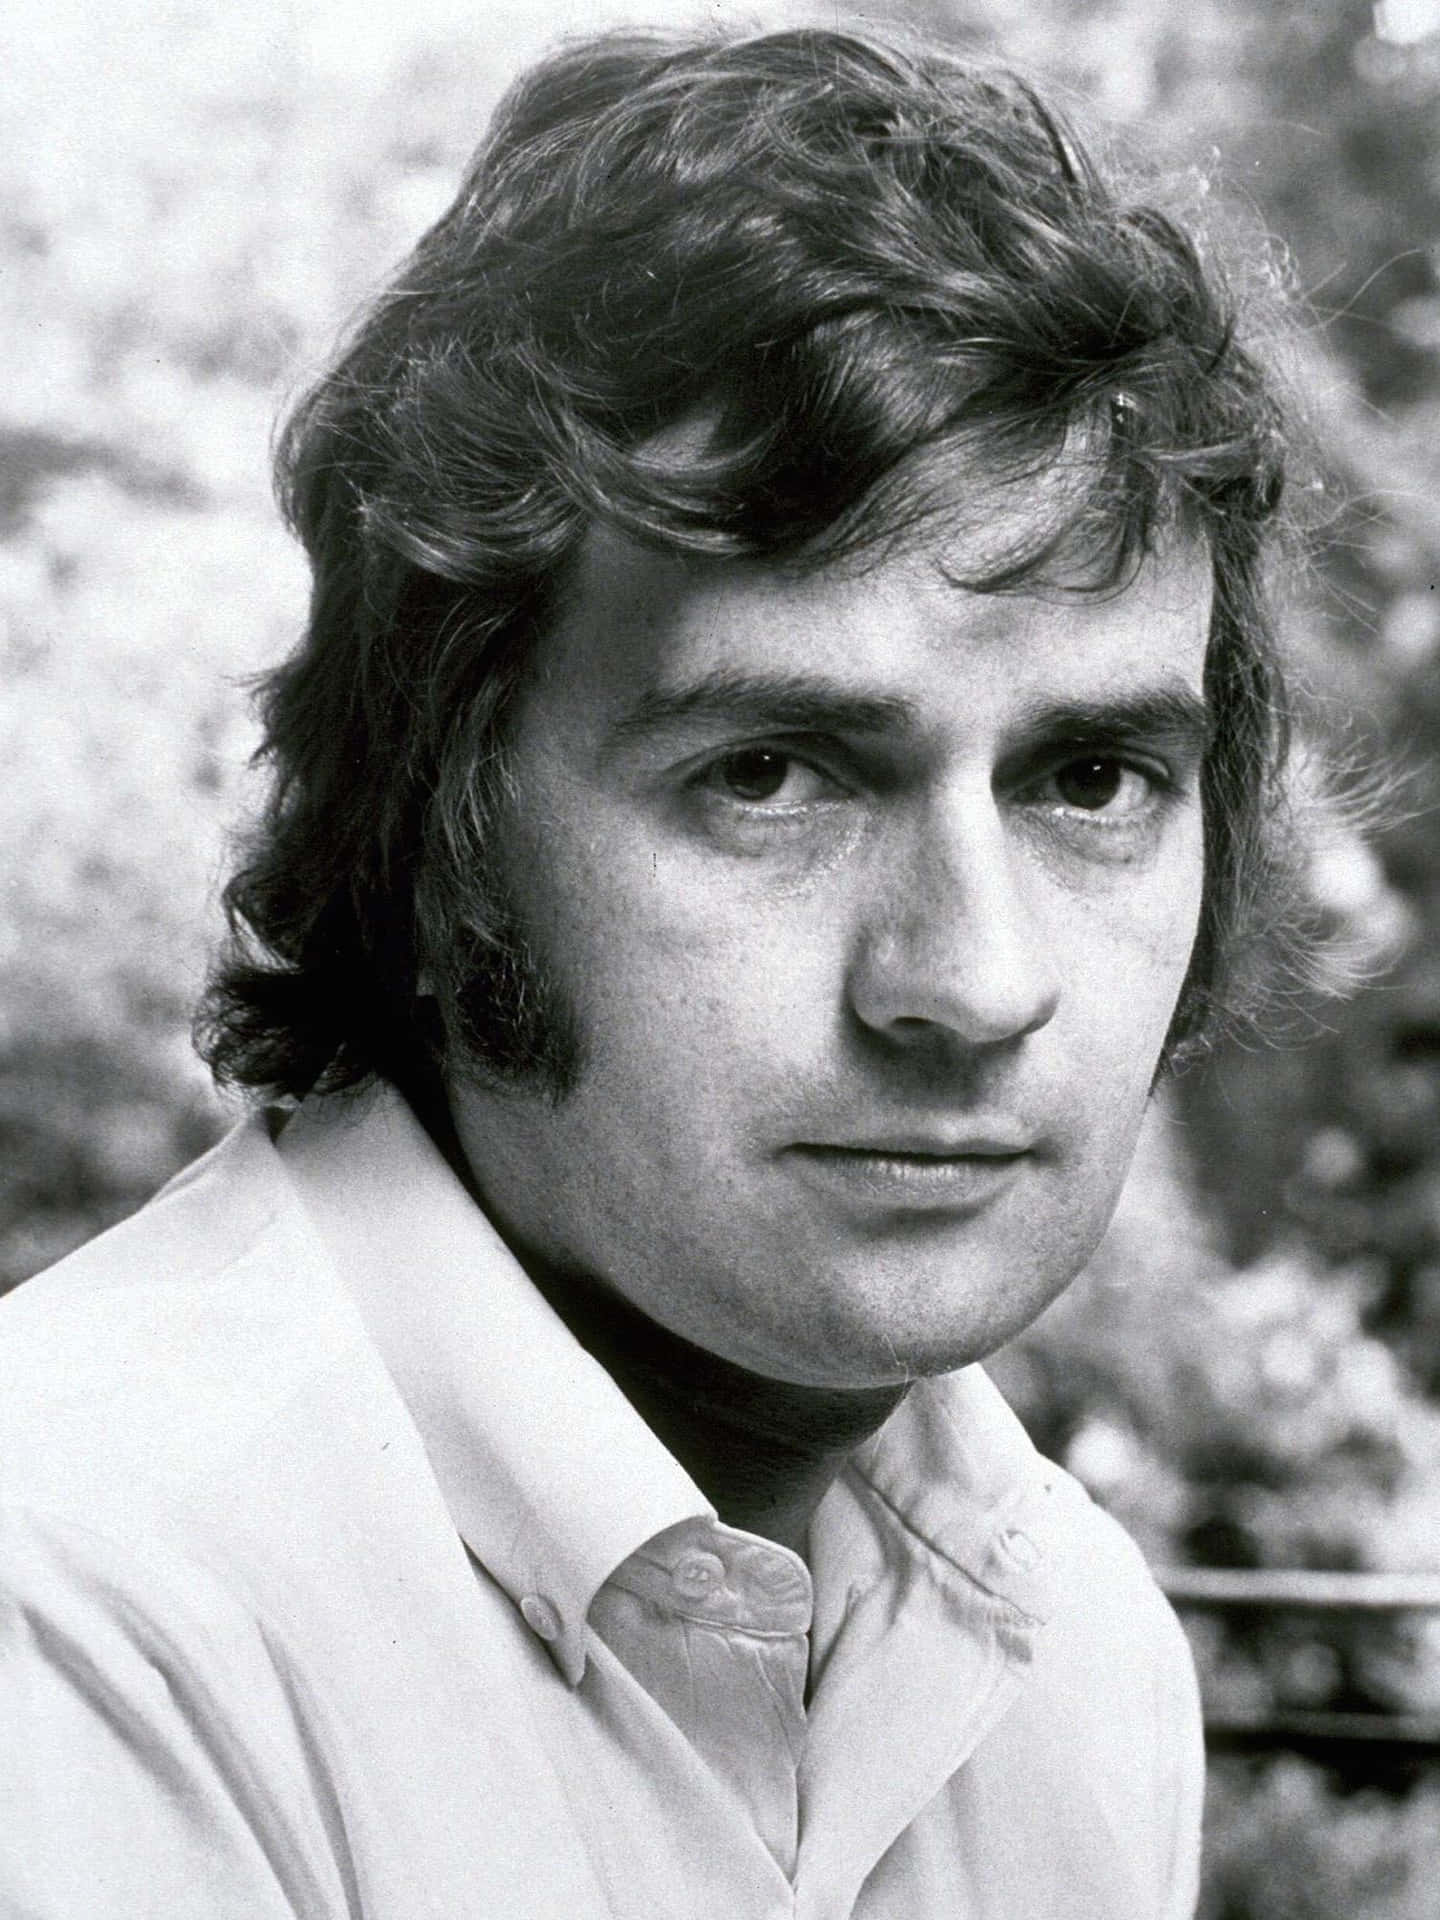 Caption: Renowned English actor and comedian Dudley Moore posing for a portrait Wallpaper